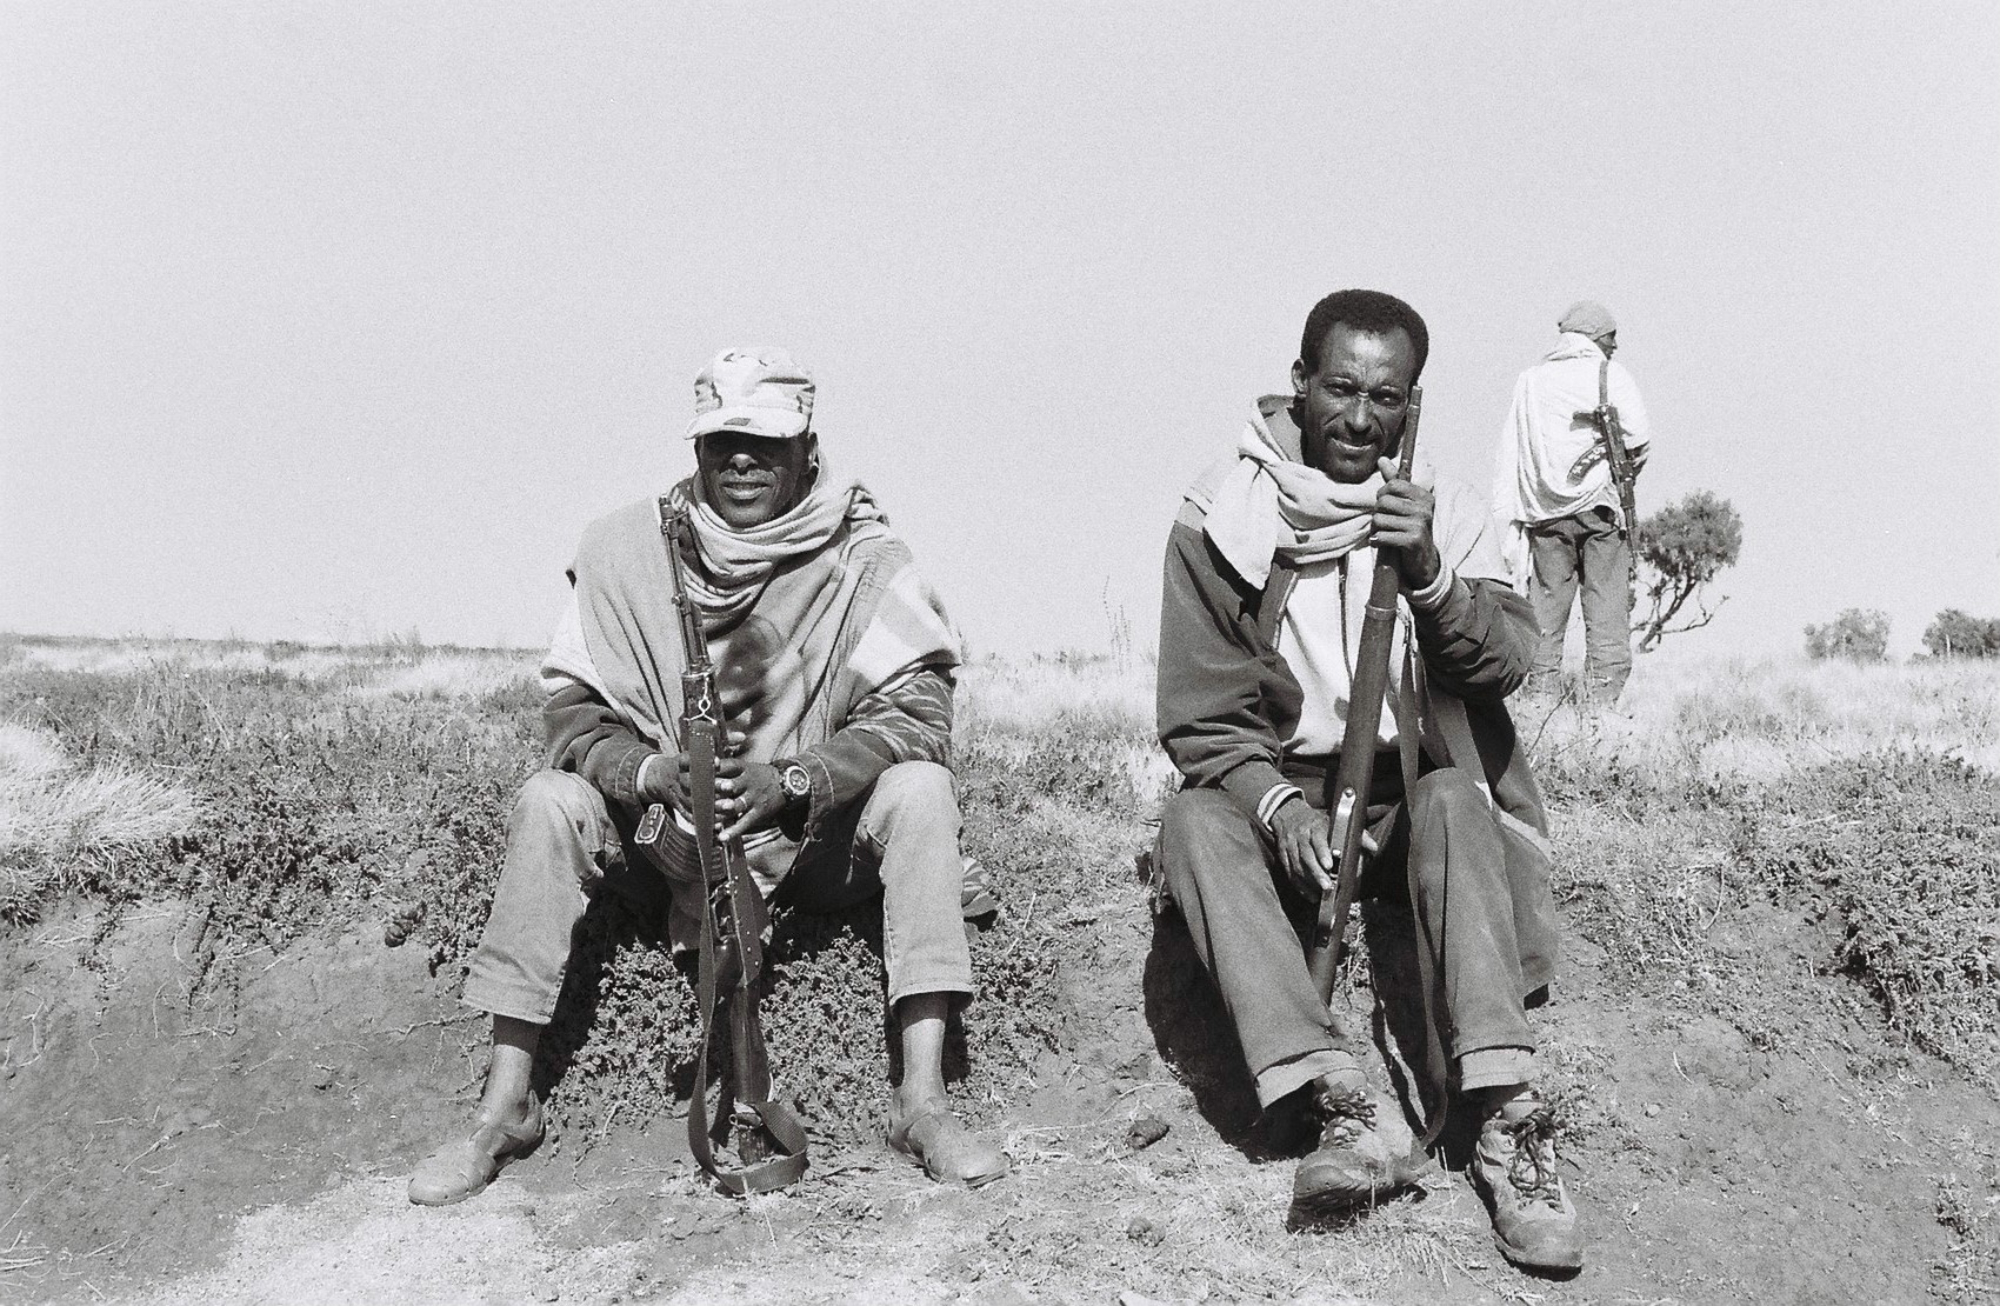  Scouts watch over tourists exploring the Simien Mountains. They are local men who pick up work from tour guides operating out of Debark. They carry Kalishnakov's and sleep on the ground outside tourist tents, often huddle together by a small fire.&n